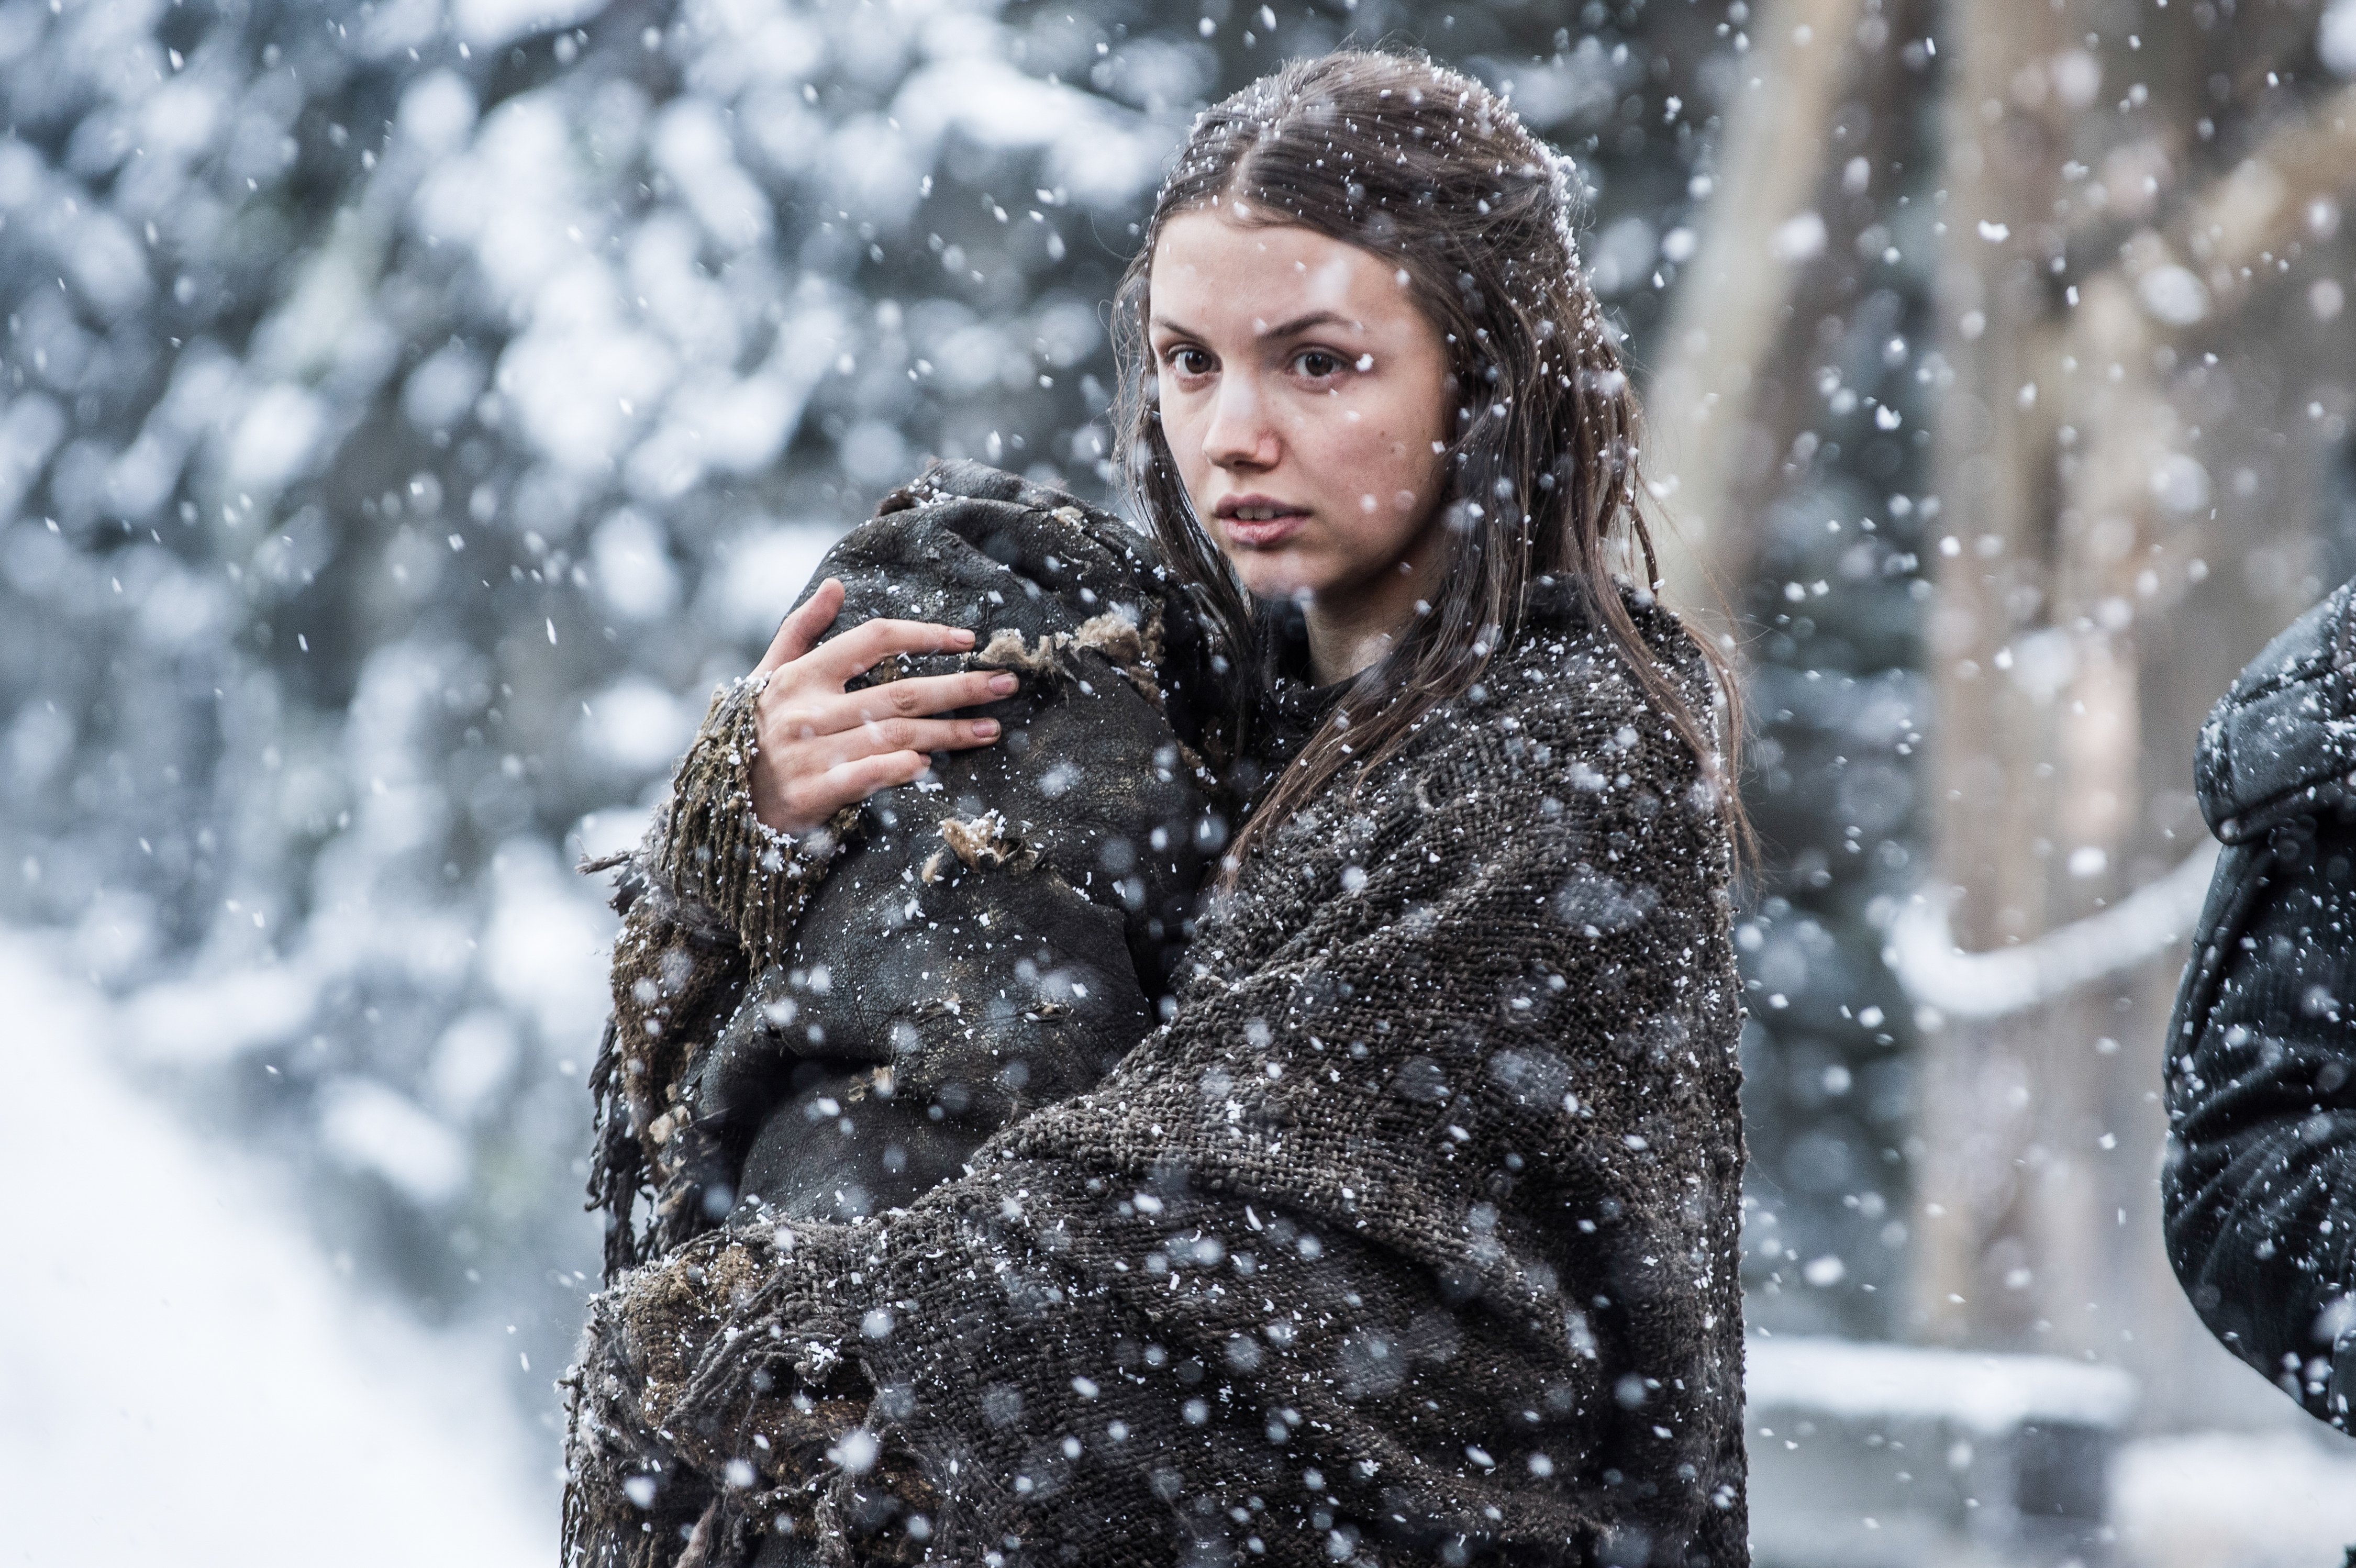 Gilly Game Of Thrones Hannah Murray 4500x2995